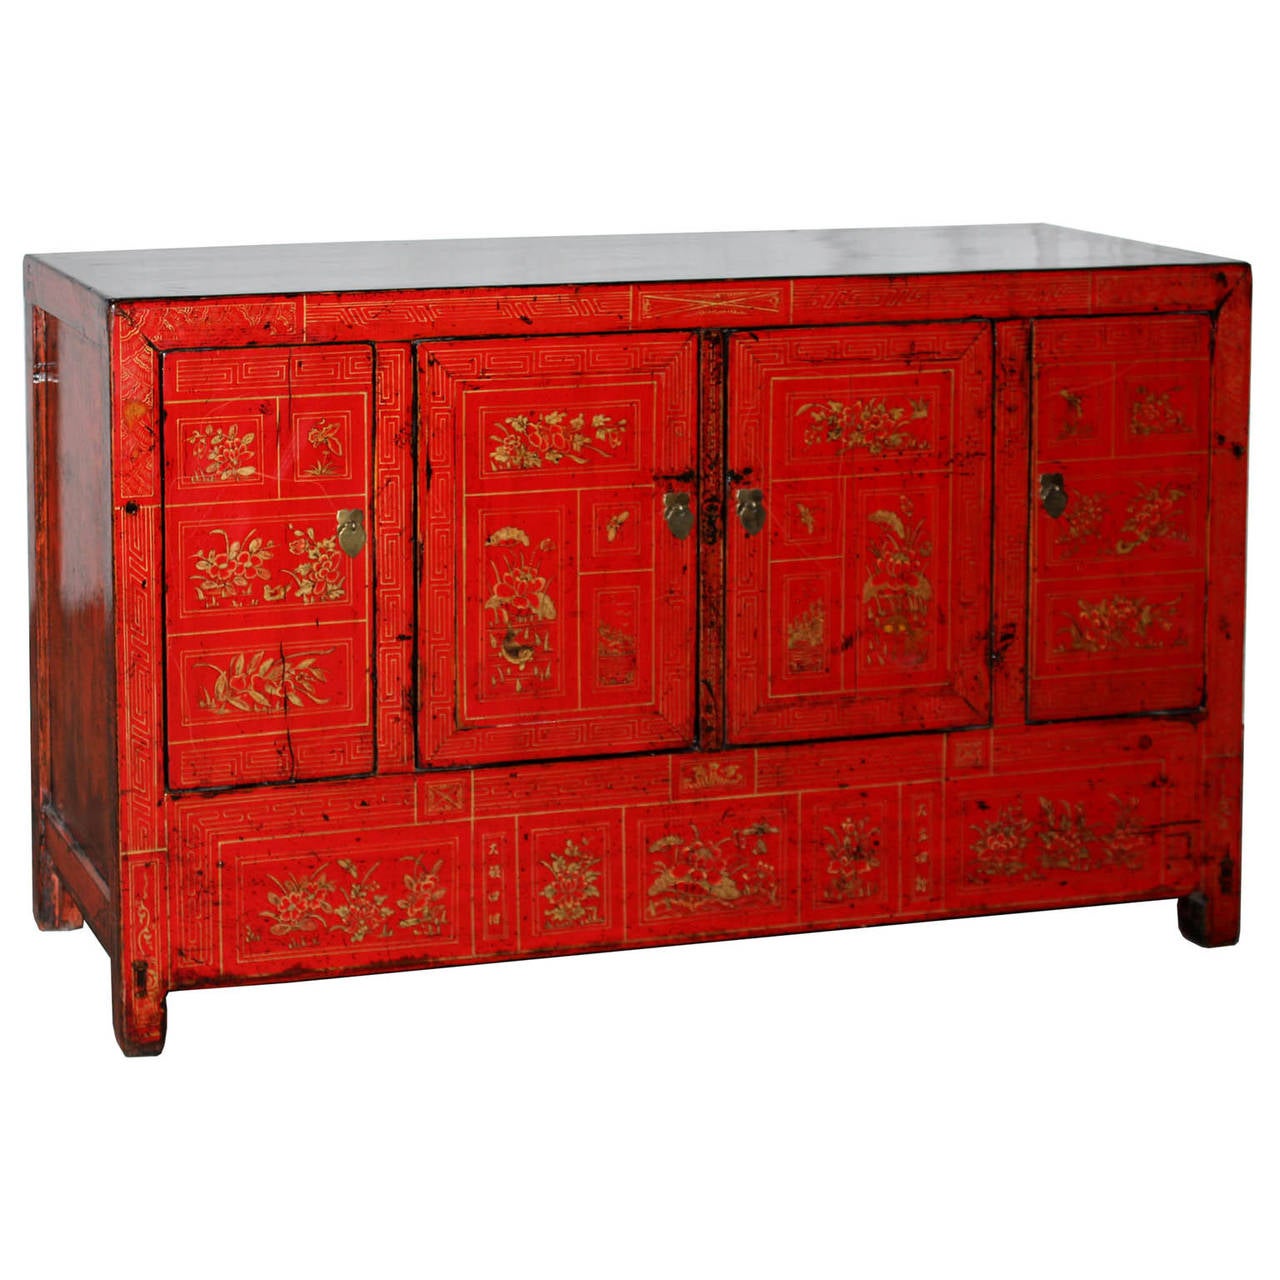 Four-door red lacquer wedding buffet with hand-painted gold leaf peonies, symbolizing prosperity and red representing happiness. New interior shelf and hardware. Middle bar removes for easy interior access, Dongbei, China, circa 1880s.